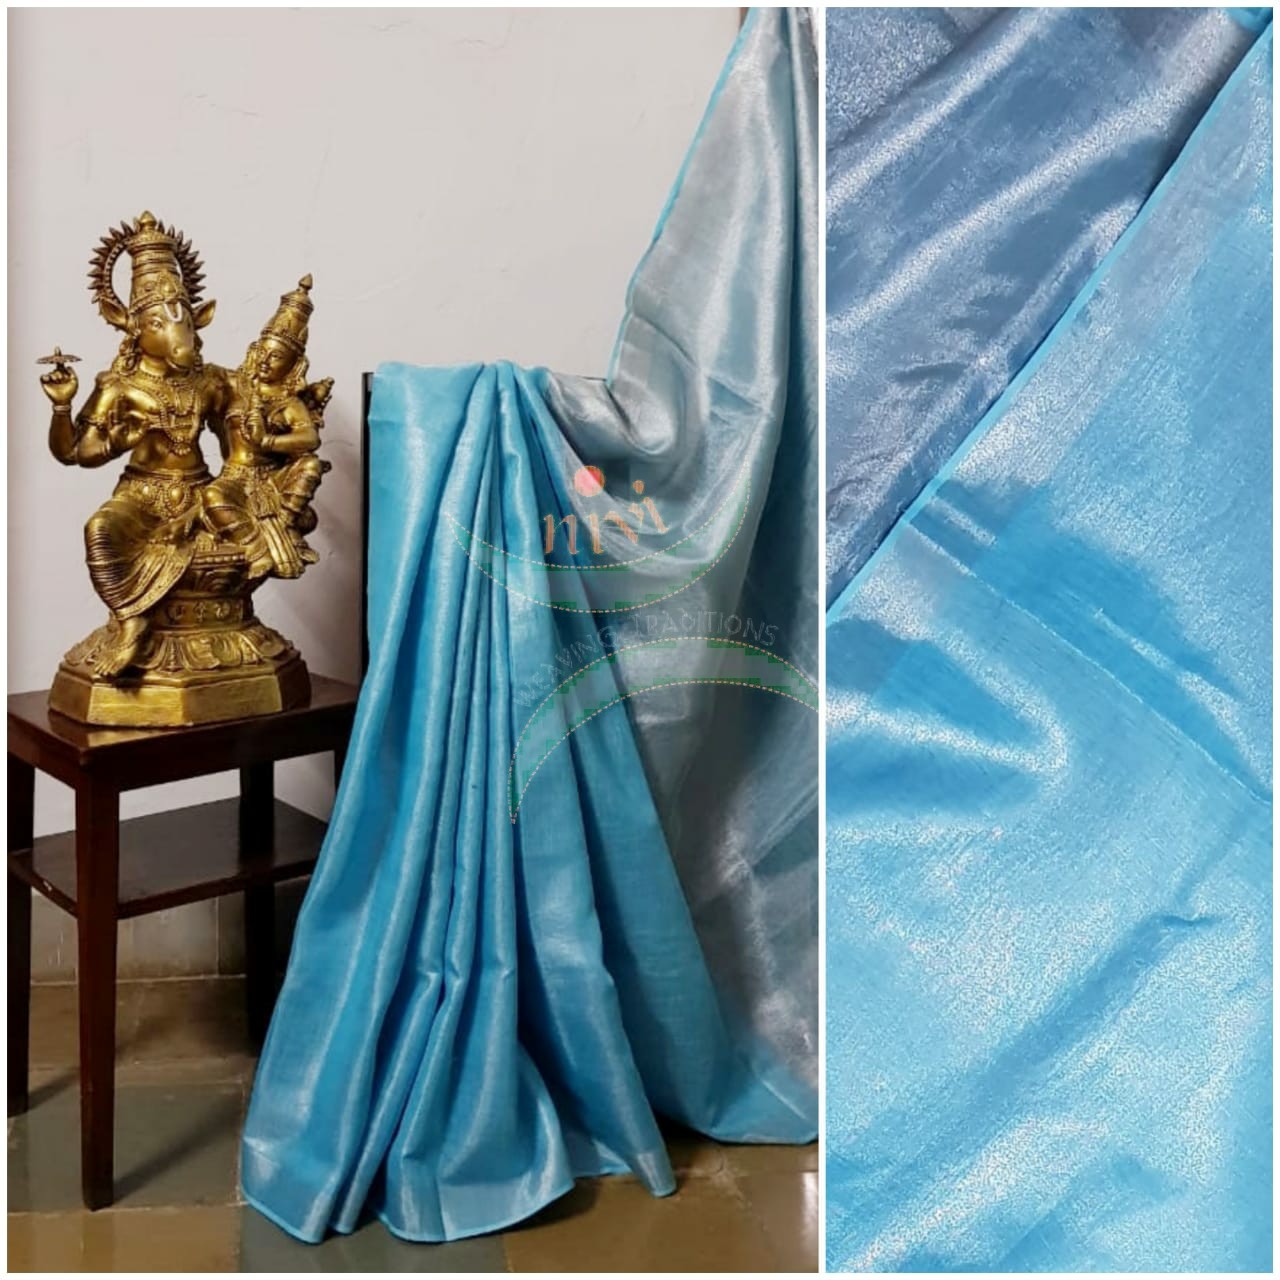 Light blue handloom tissue linen with silverish grey border. The saree comes with running blouse.